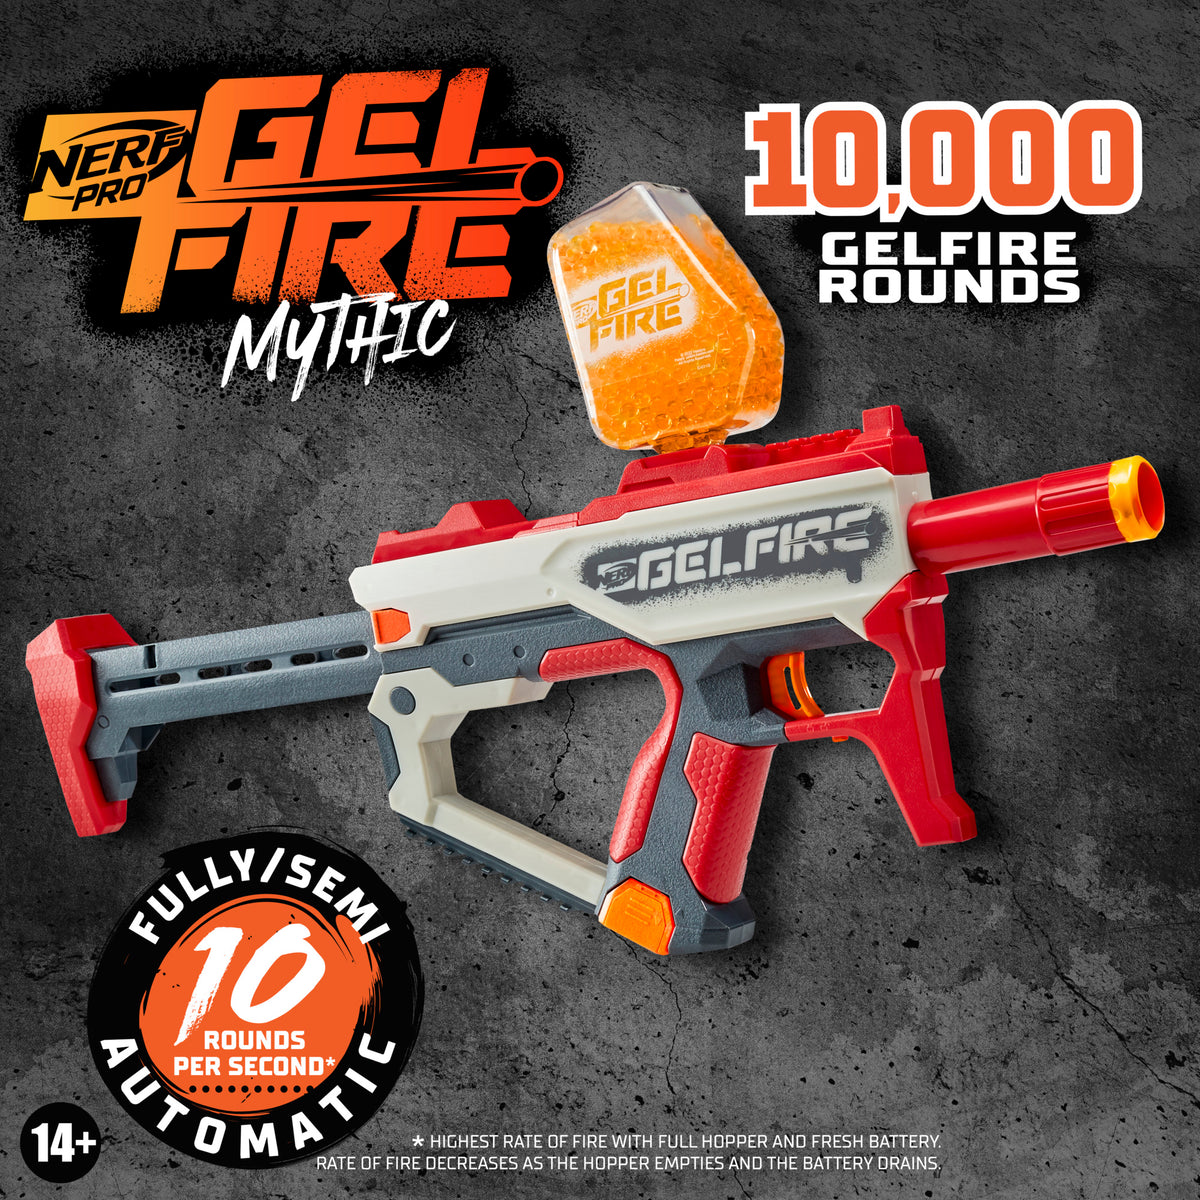 New Nerf Pro Gelfire Blasters Appear! Ghost, Raid, and Dual Wield!